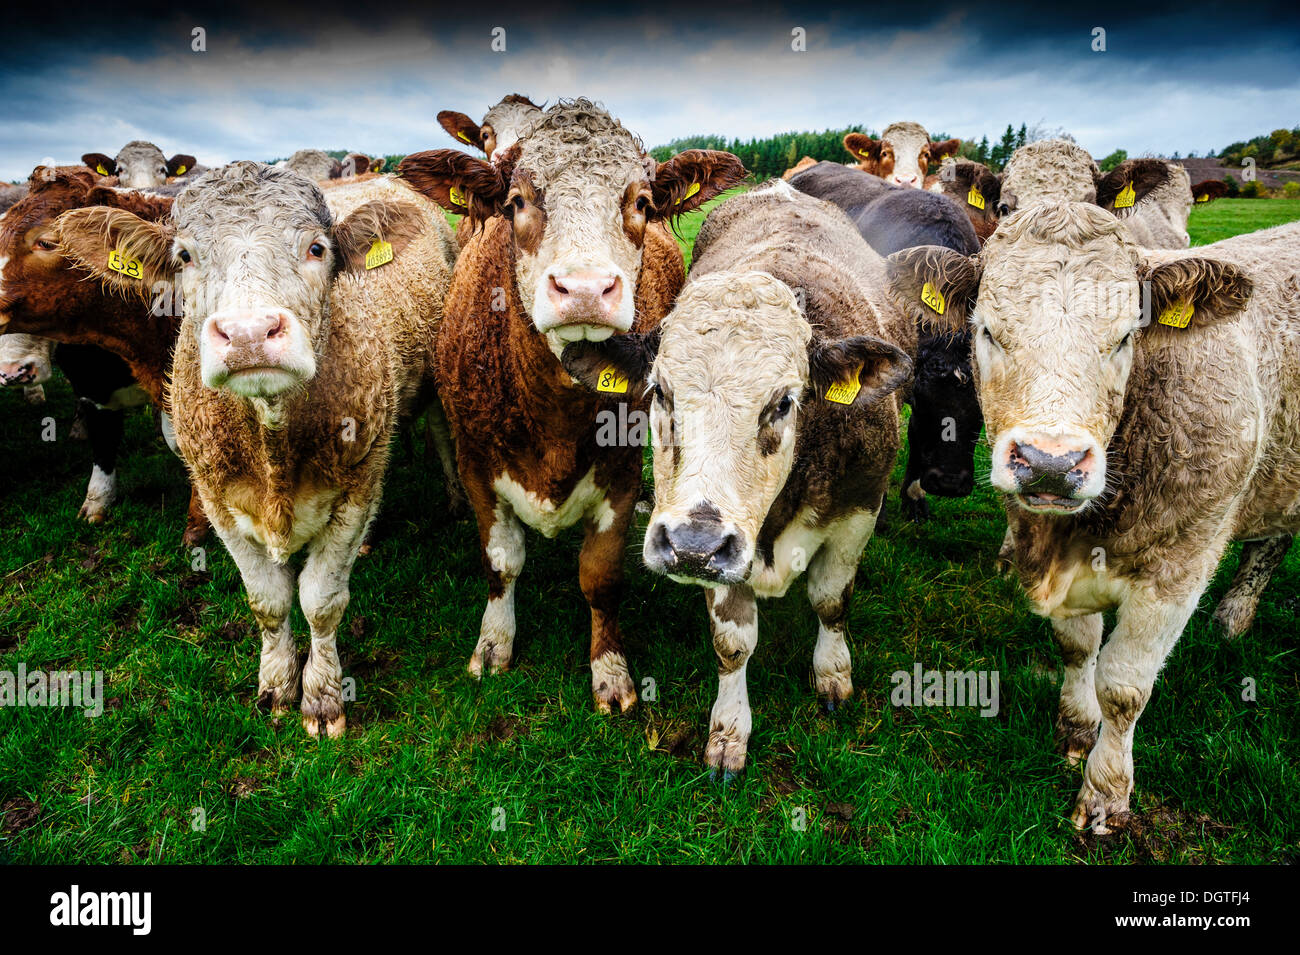 Curious cows in a field Stock Photo